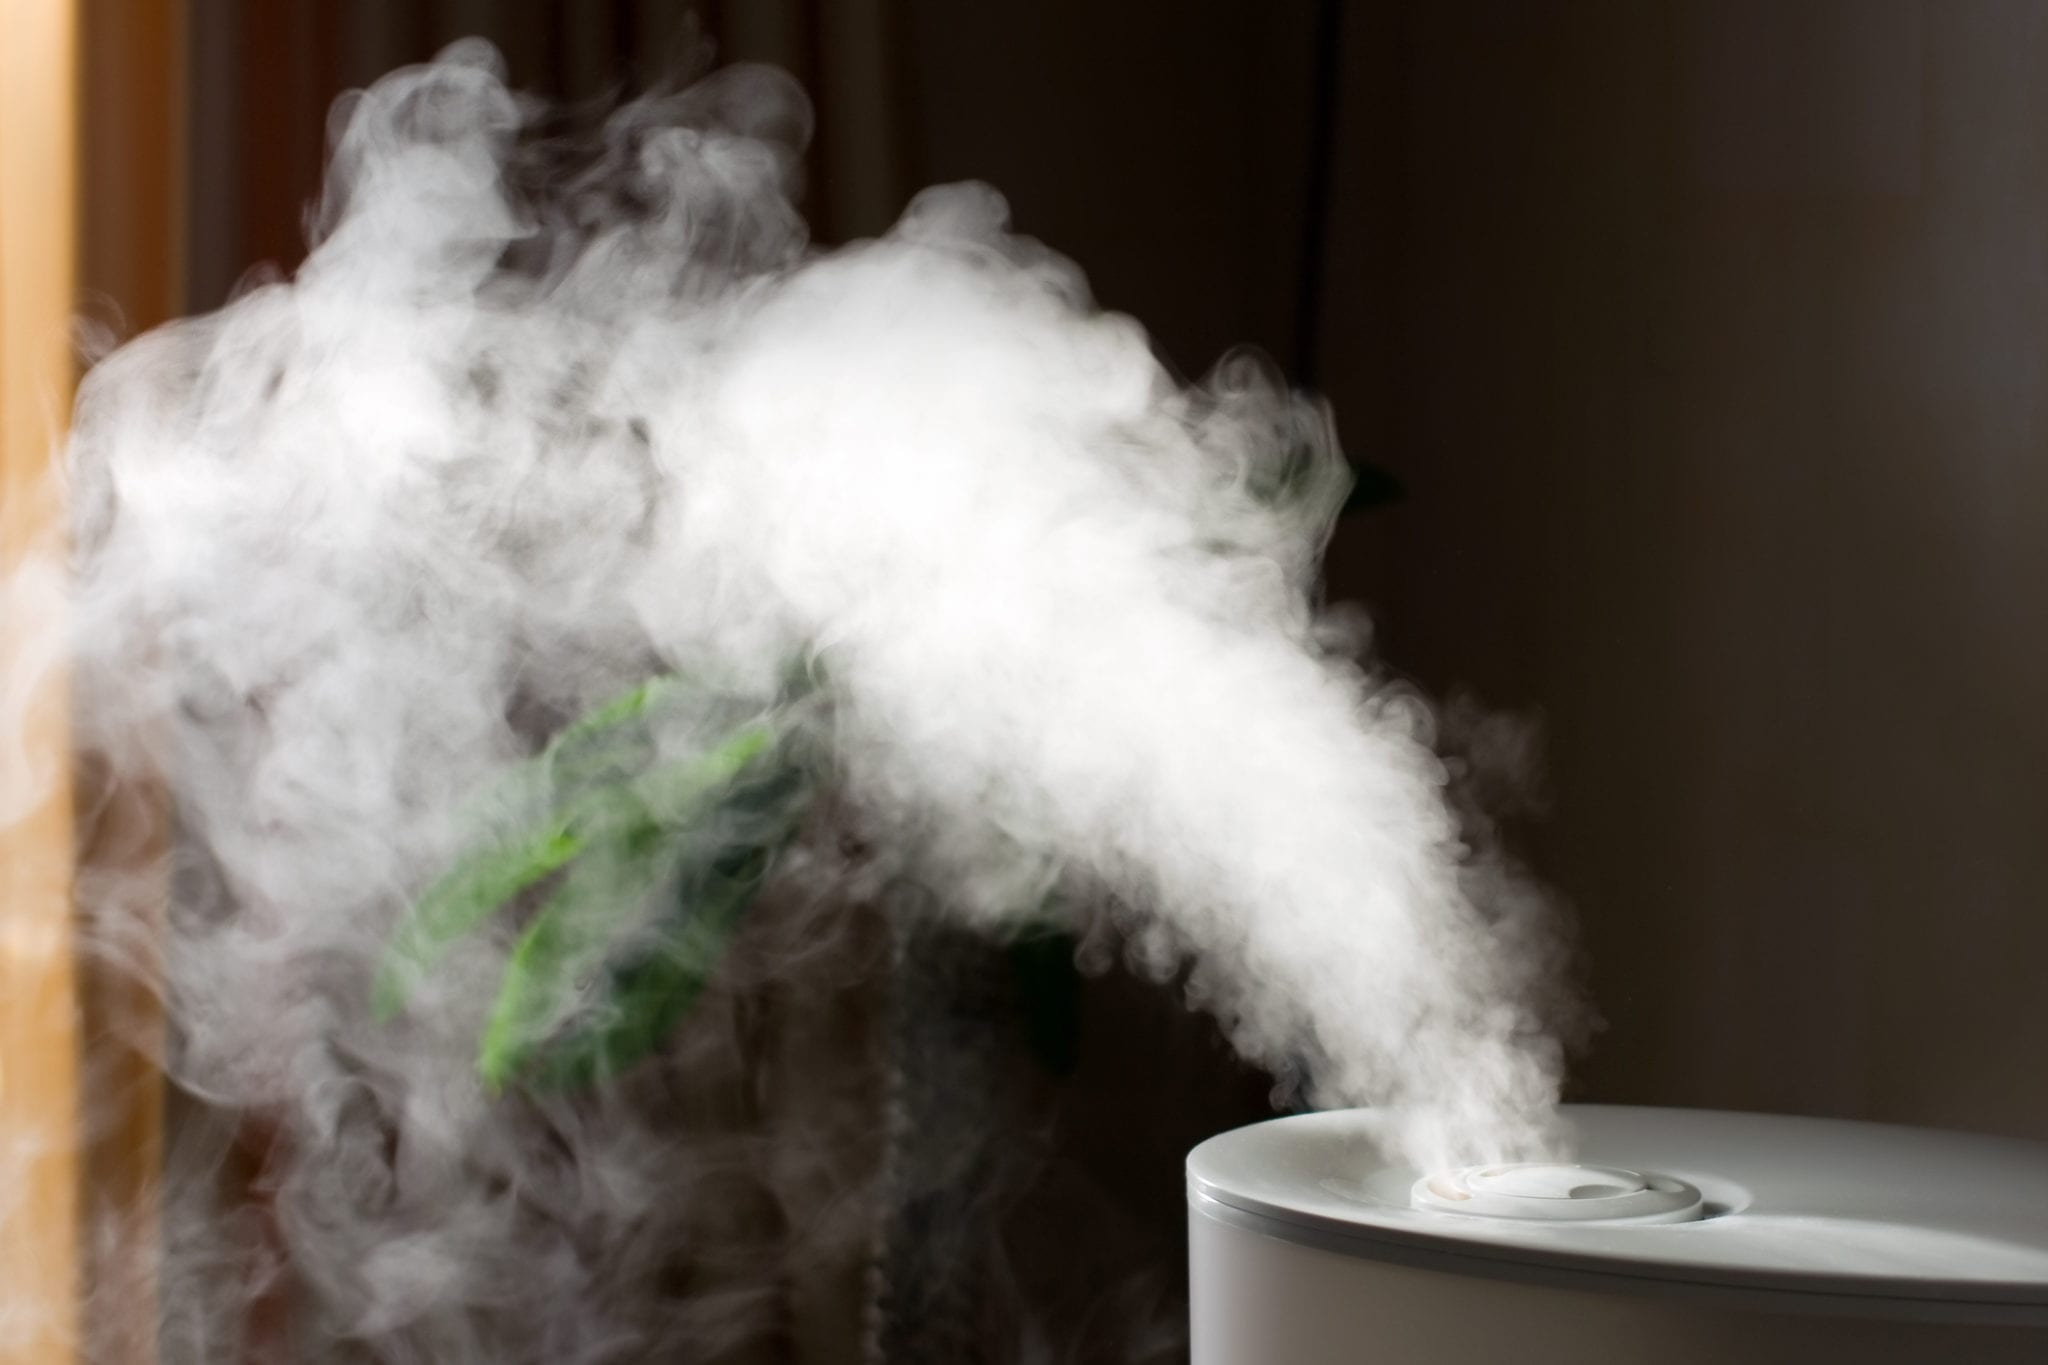 Humidifier maintenance and repair in Fallston, MD